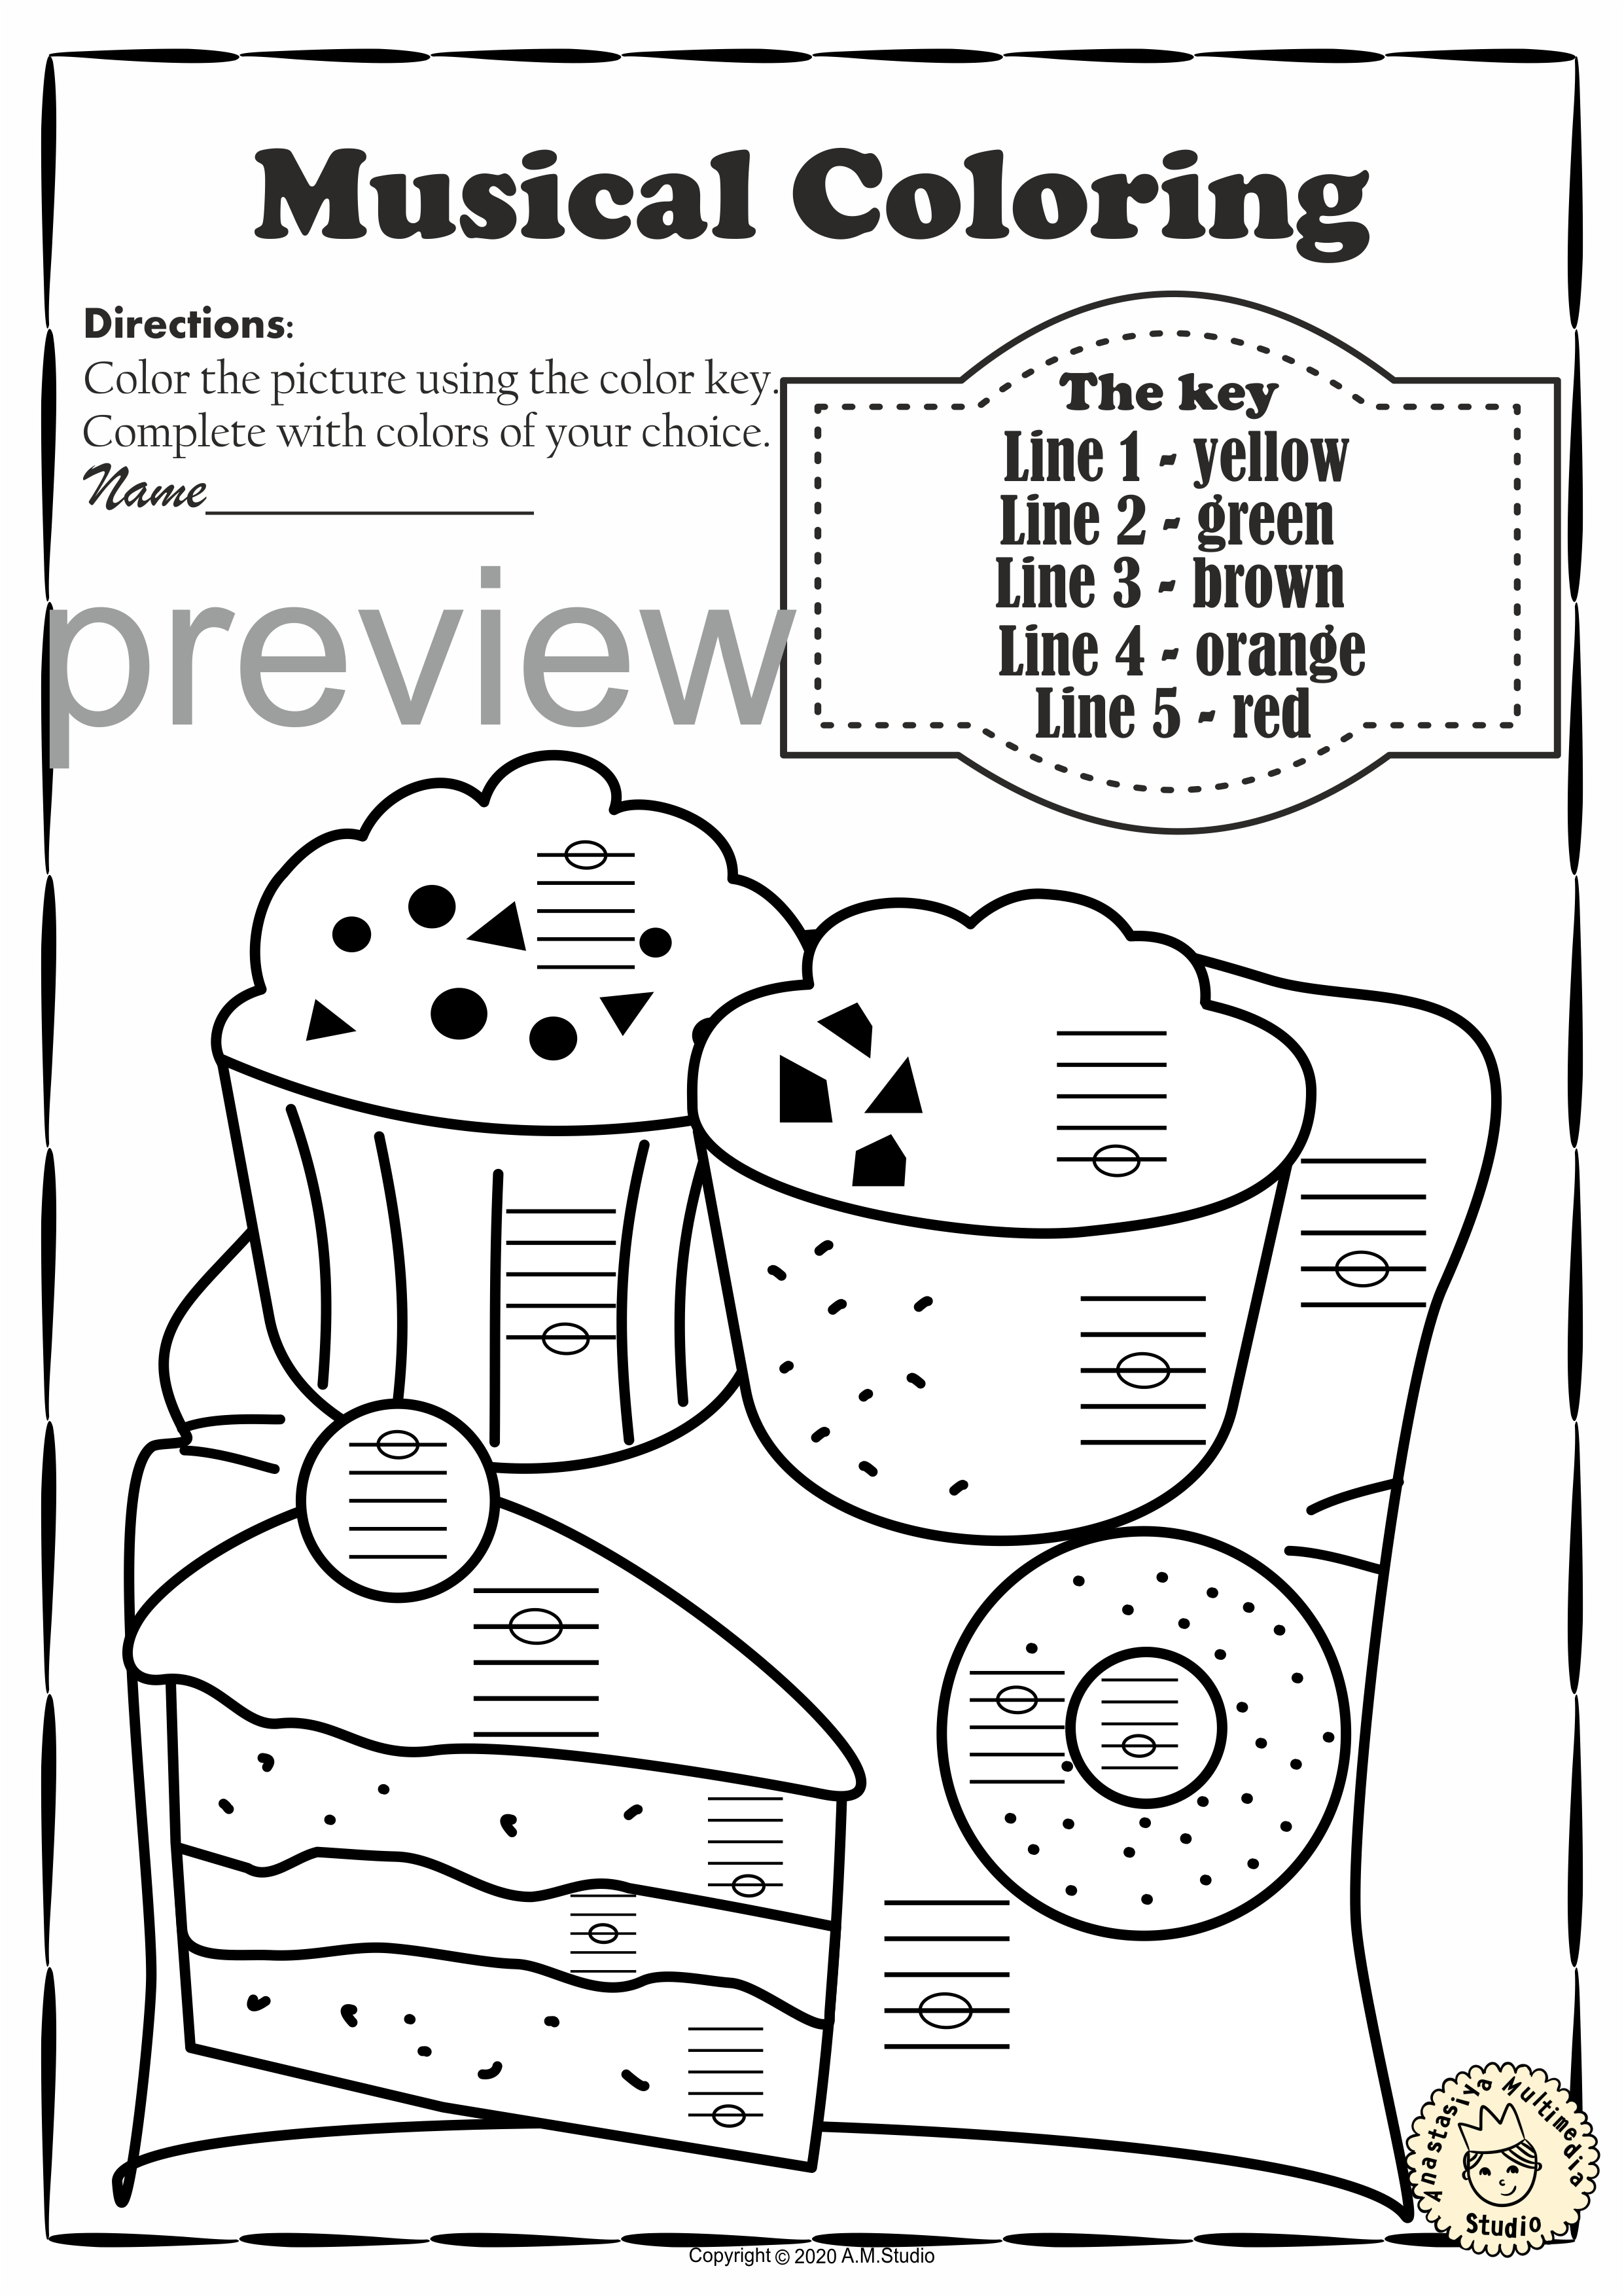 Summer Music Coloring Pages | Lines and Spaces Coloring Worksheets (img # 2)